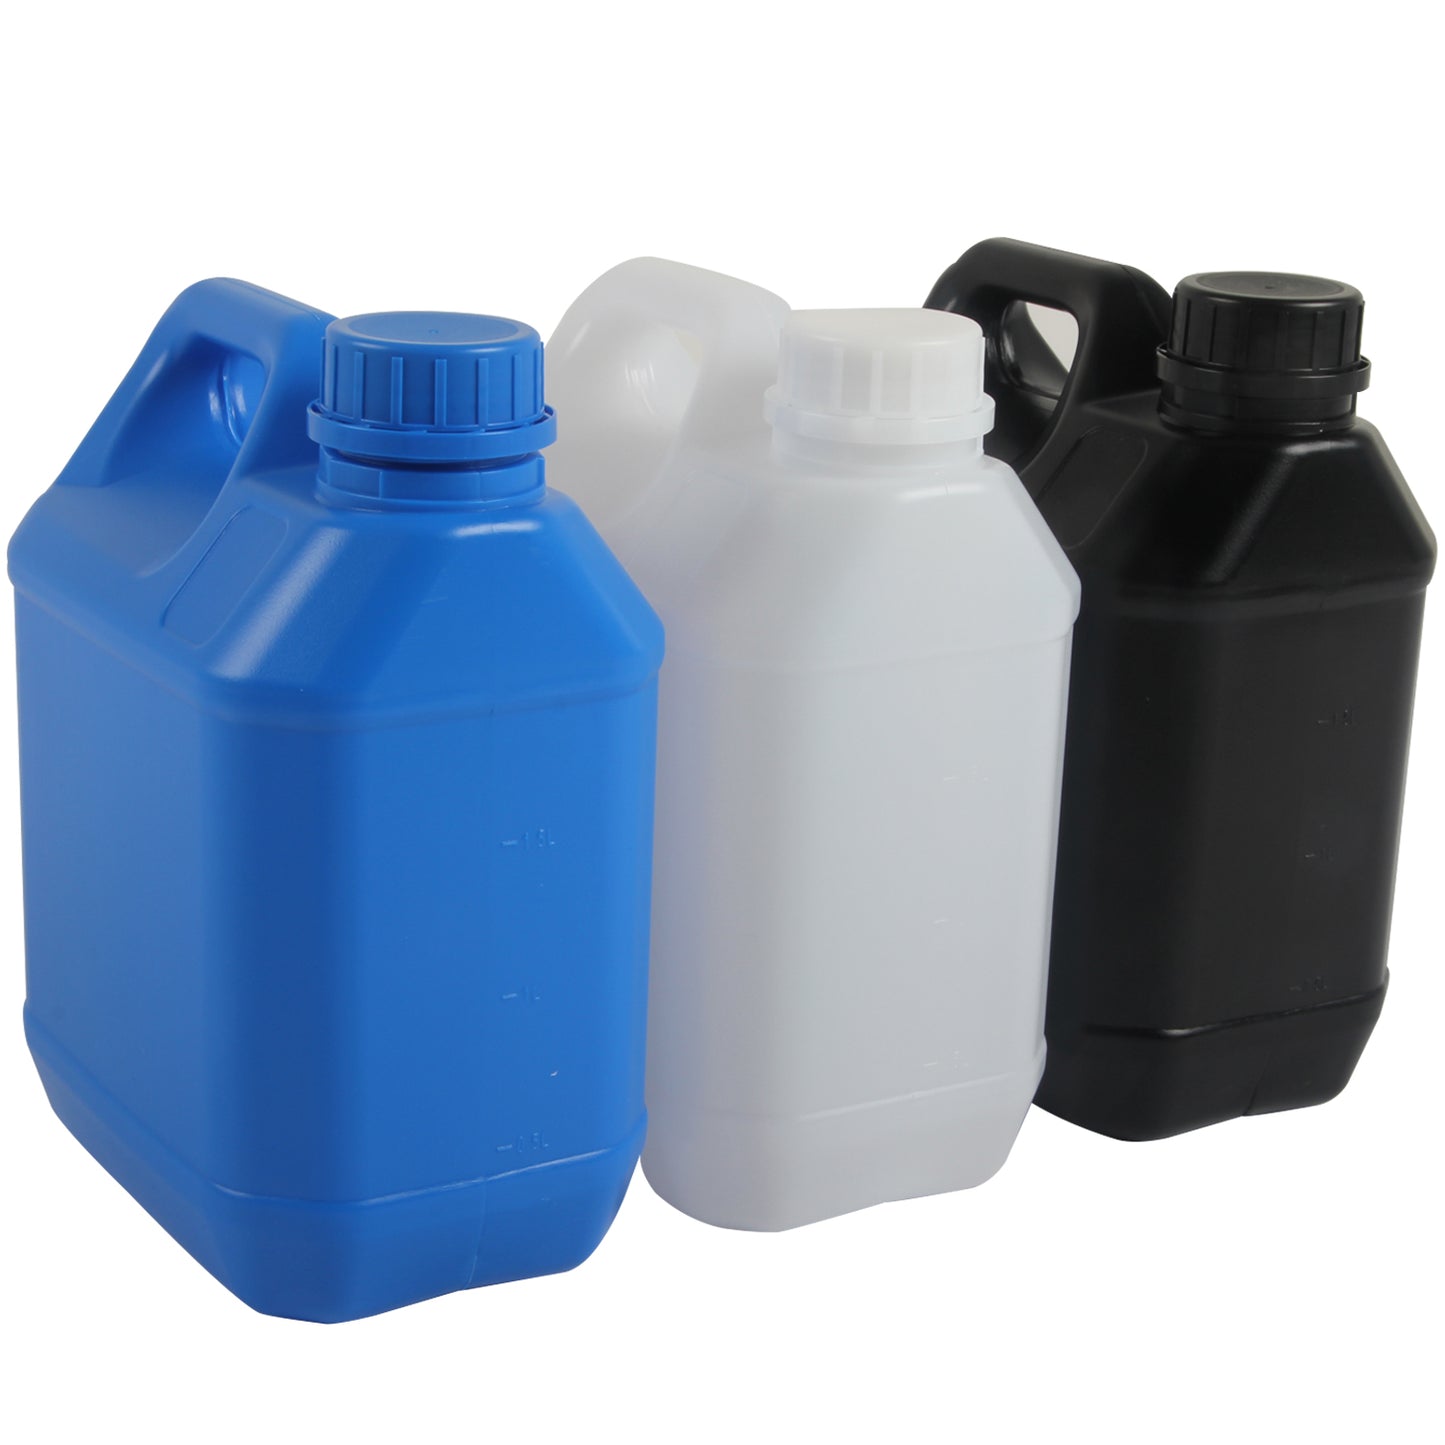 1x 2L Darkroom Chemical Liquid Storage Bottles Kettle with Caps for Developer Fixer Stopper Laboratory